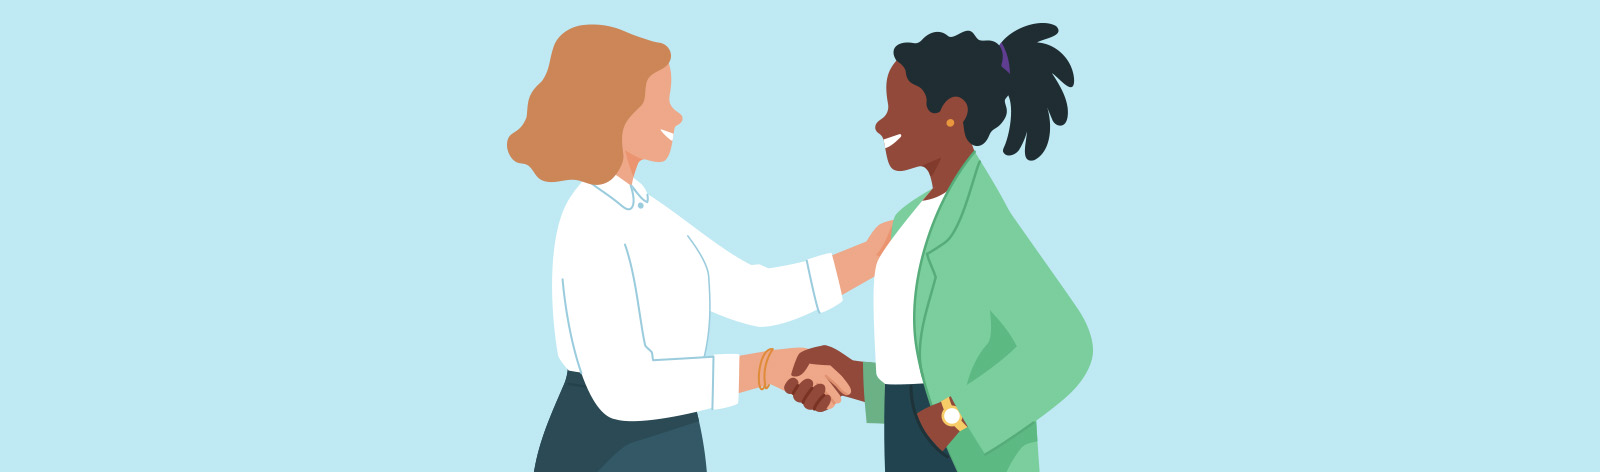 illustrated image of two people shaking hands